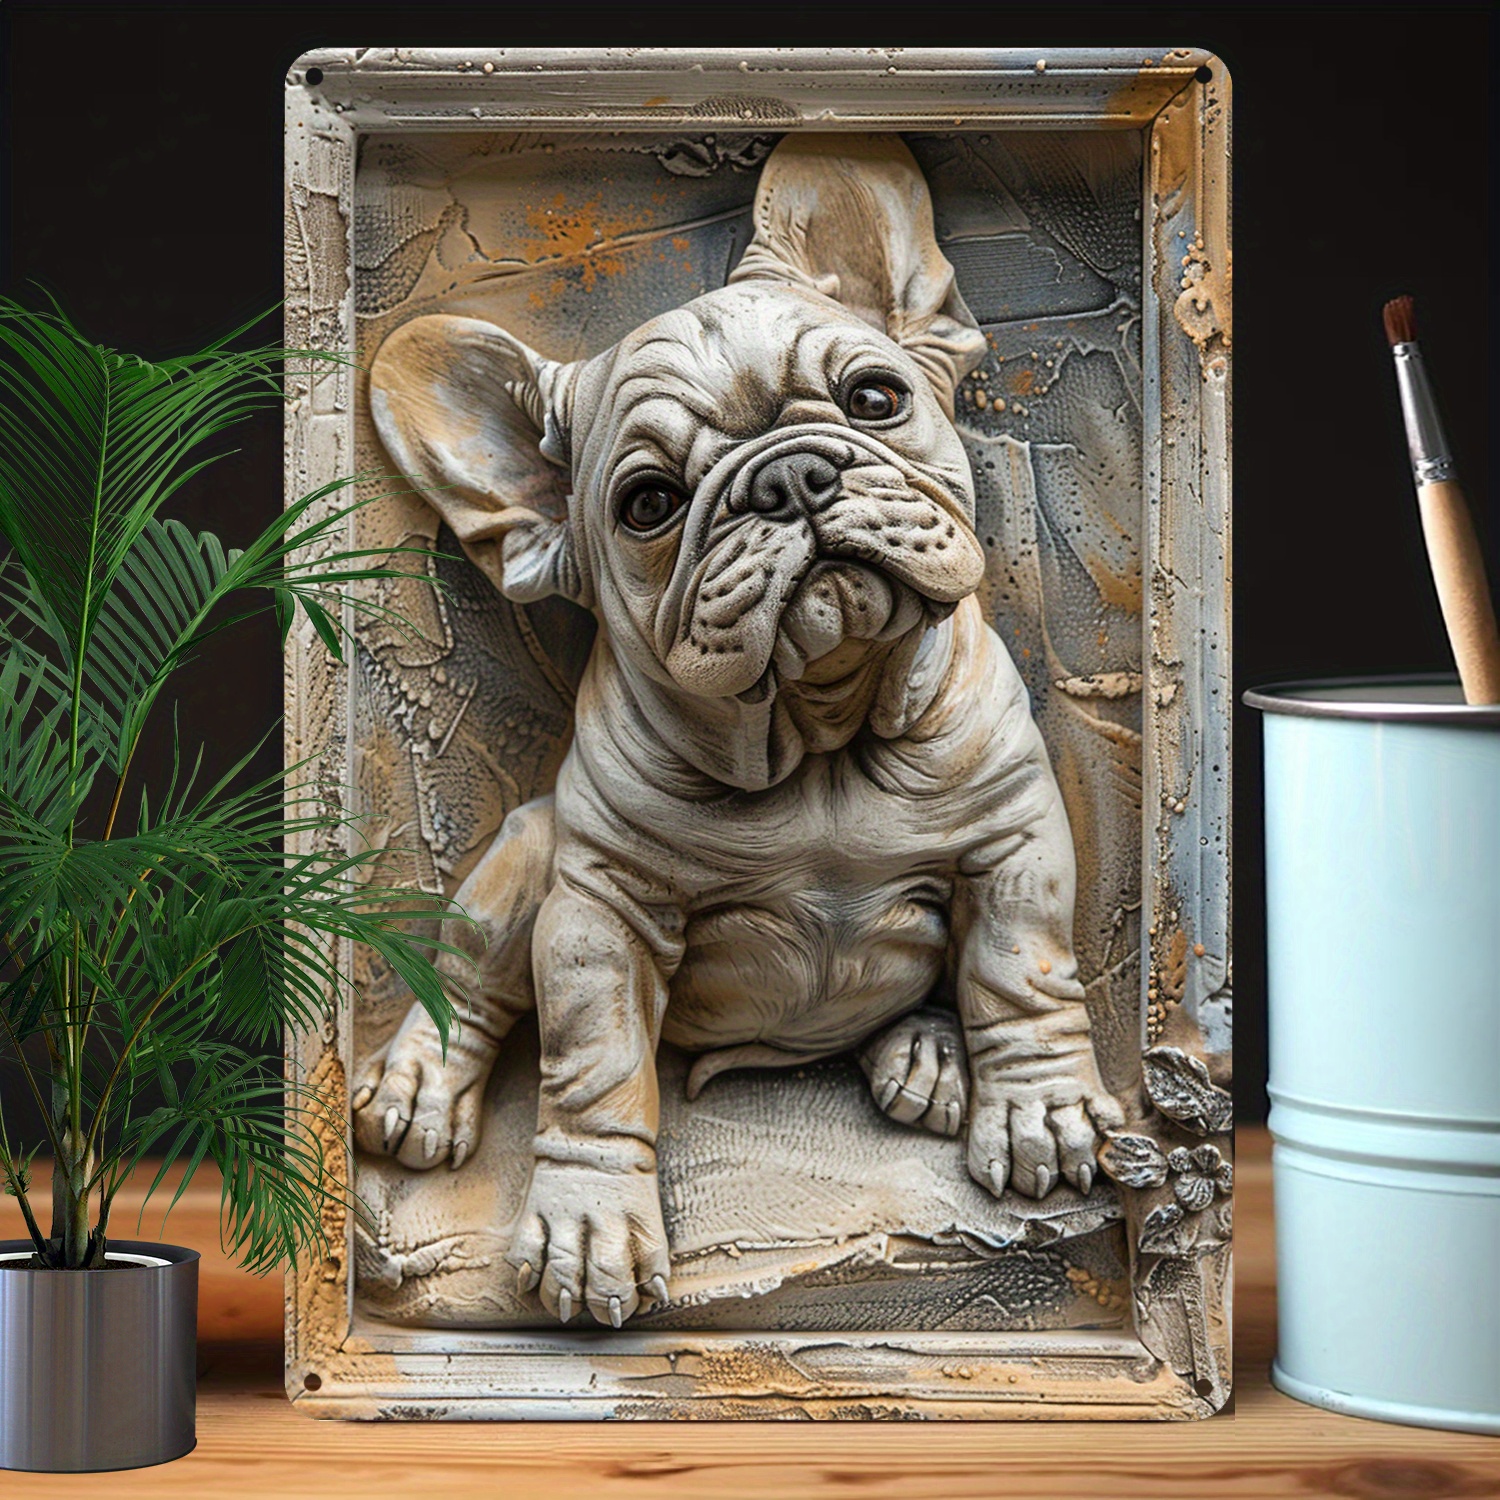 

Aluminum Bulldog Themed Decorative Metal Tin Sign - 8x12 Inches Moisture Resistant 3d Relief Artwork For Home And Office Wall Decor, Durable High Bend Resistance, Unique Vintage Gift A2010 (1pc)